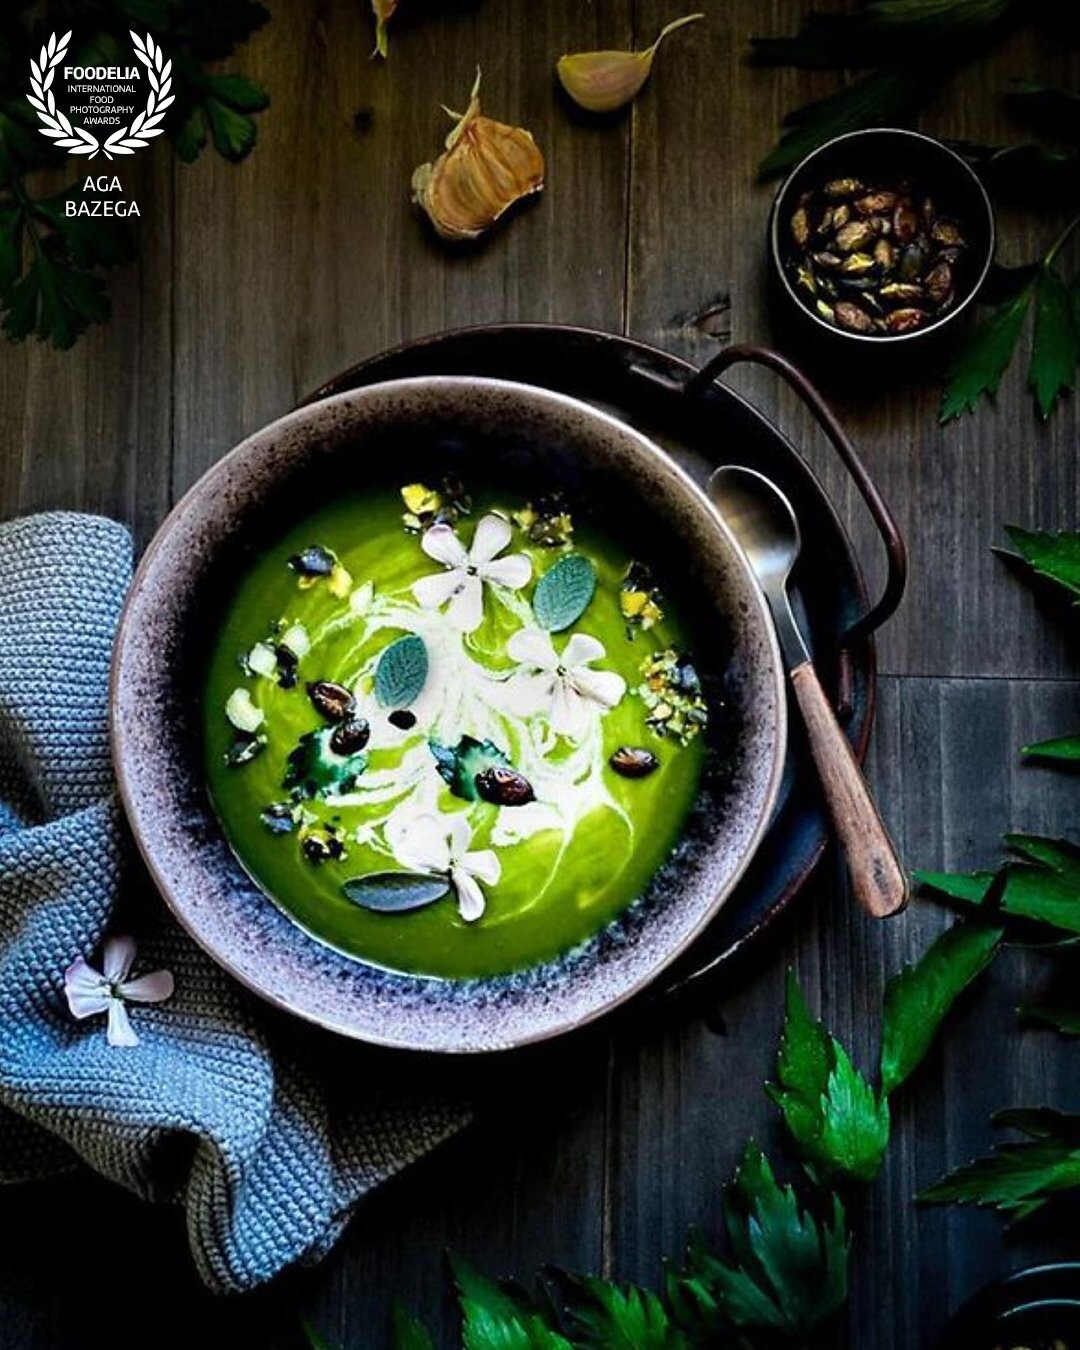 Lovage soup, it is not only tasty but also provides multiple health benefits. Seasoned with roasted pumpkin seeds and pistachios.